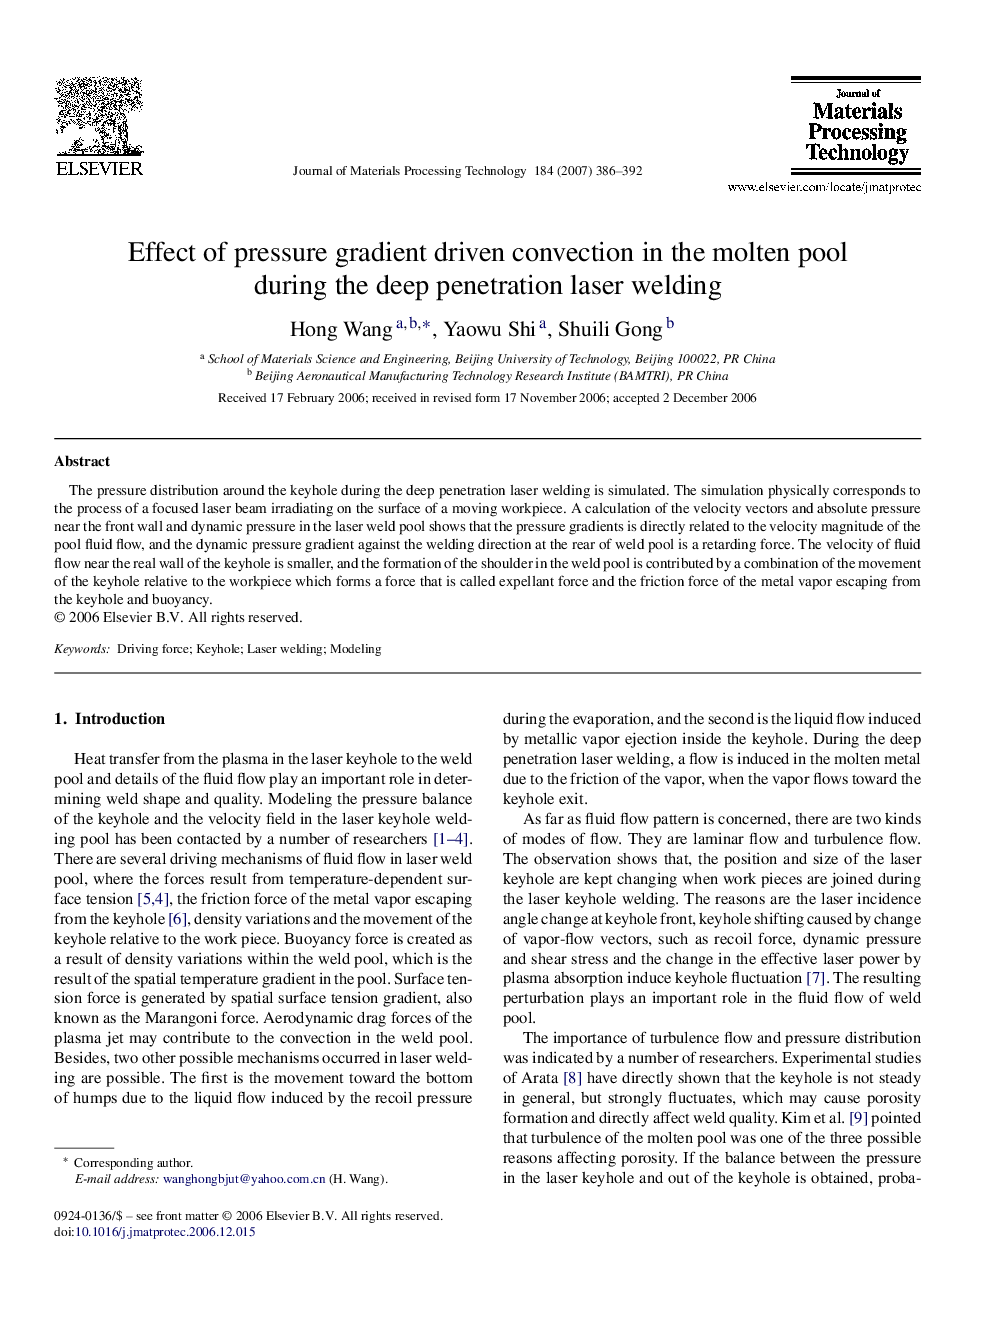 Effect of pressure gradient driven convection in the molten pool during the deep penetration laser welding